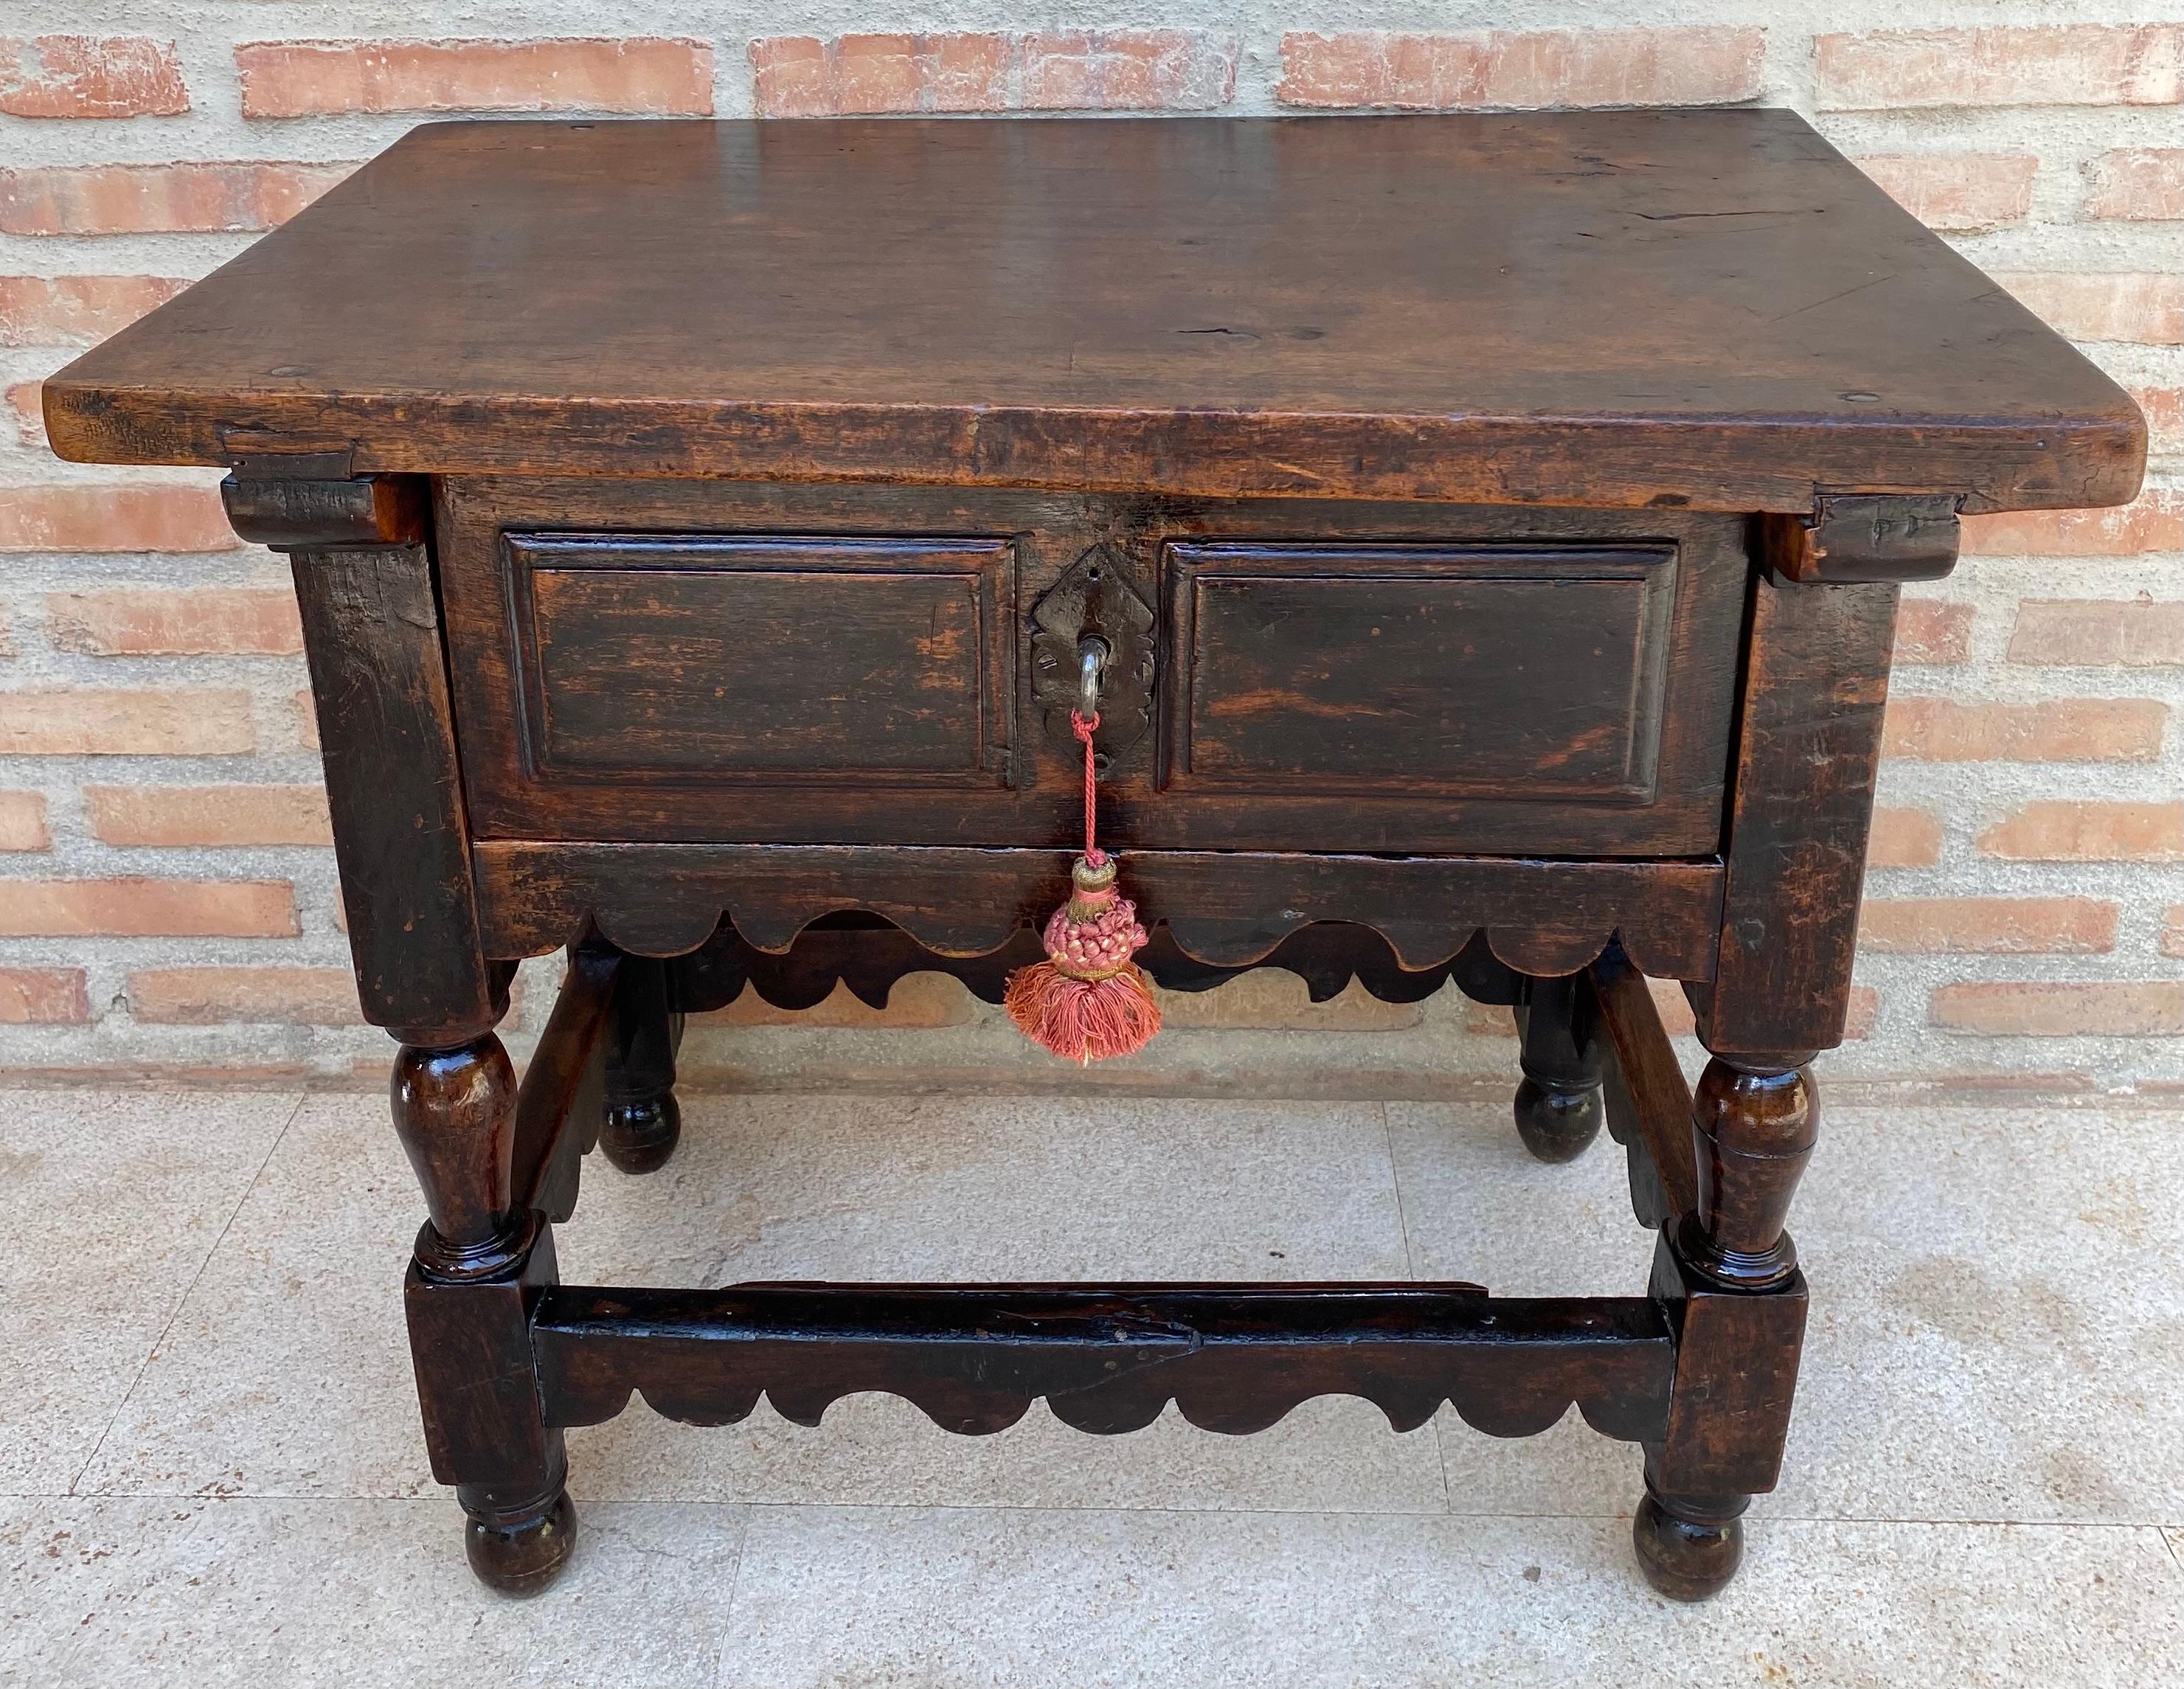 Spanish side table with walnut chest of drawers from the 19th century, around 1880. With iron handle and feet on classic Renaissance balustrades.

Spanish side table with a drawer in walnut wood, from the end of the 19th century. This antique